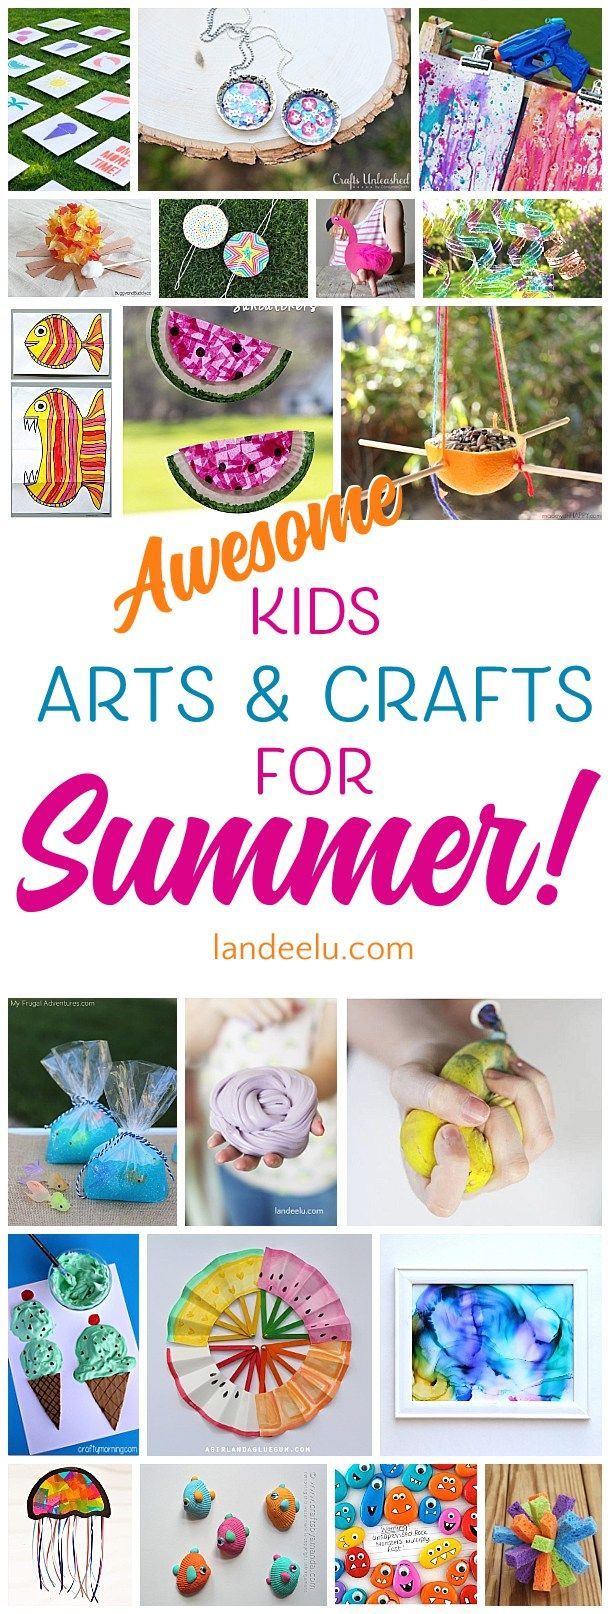 So many fun summer craft ideas for kids to keep their minds and creativity going all summer long! I love the ice cream paintings!